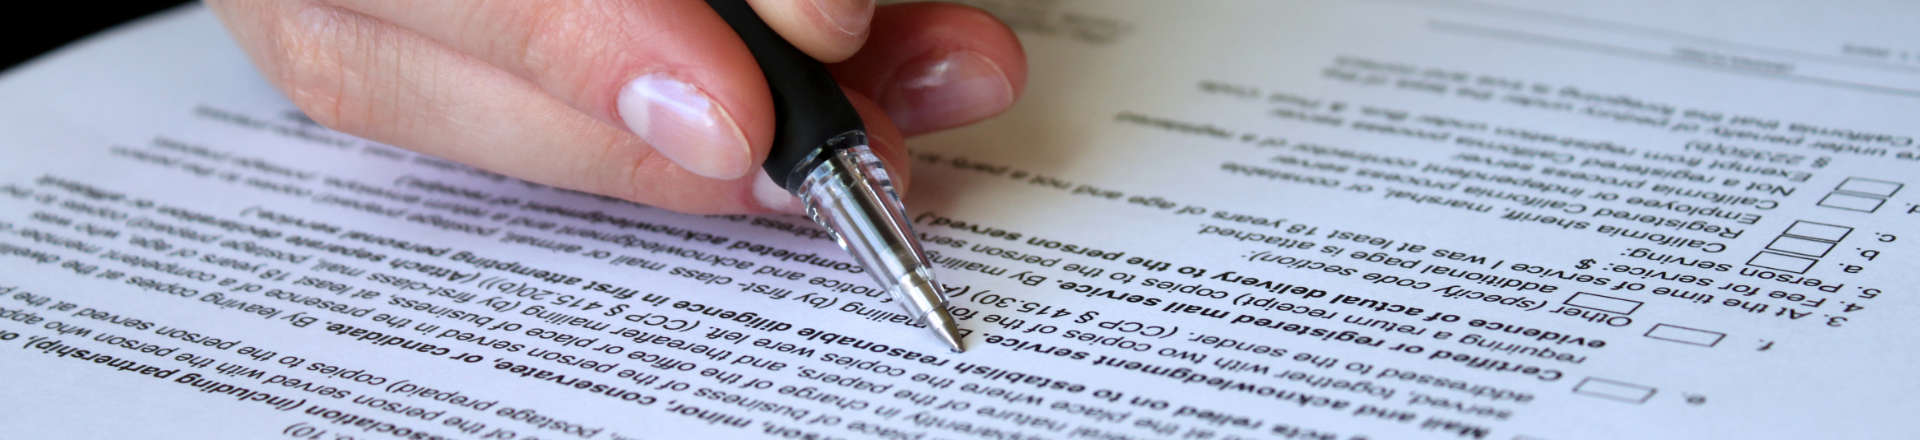 a person reading the agreement points